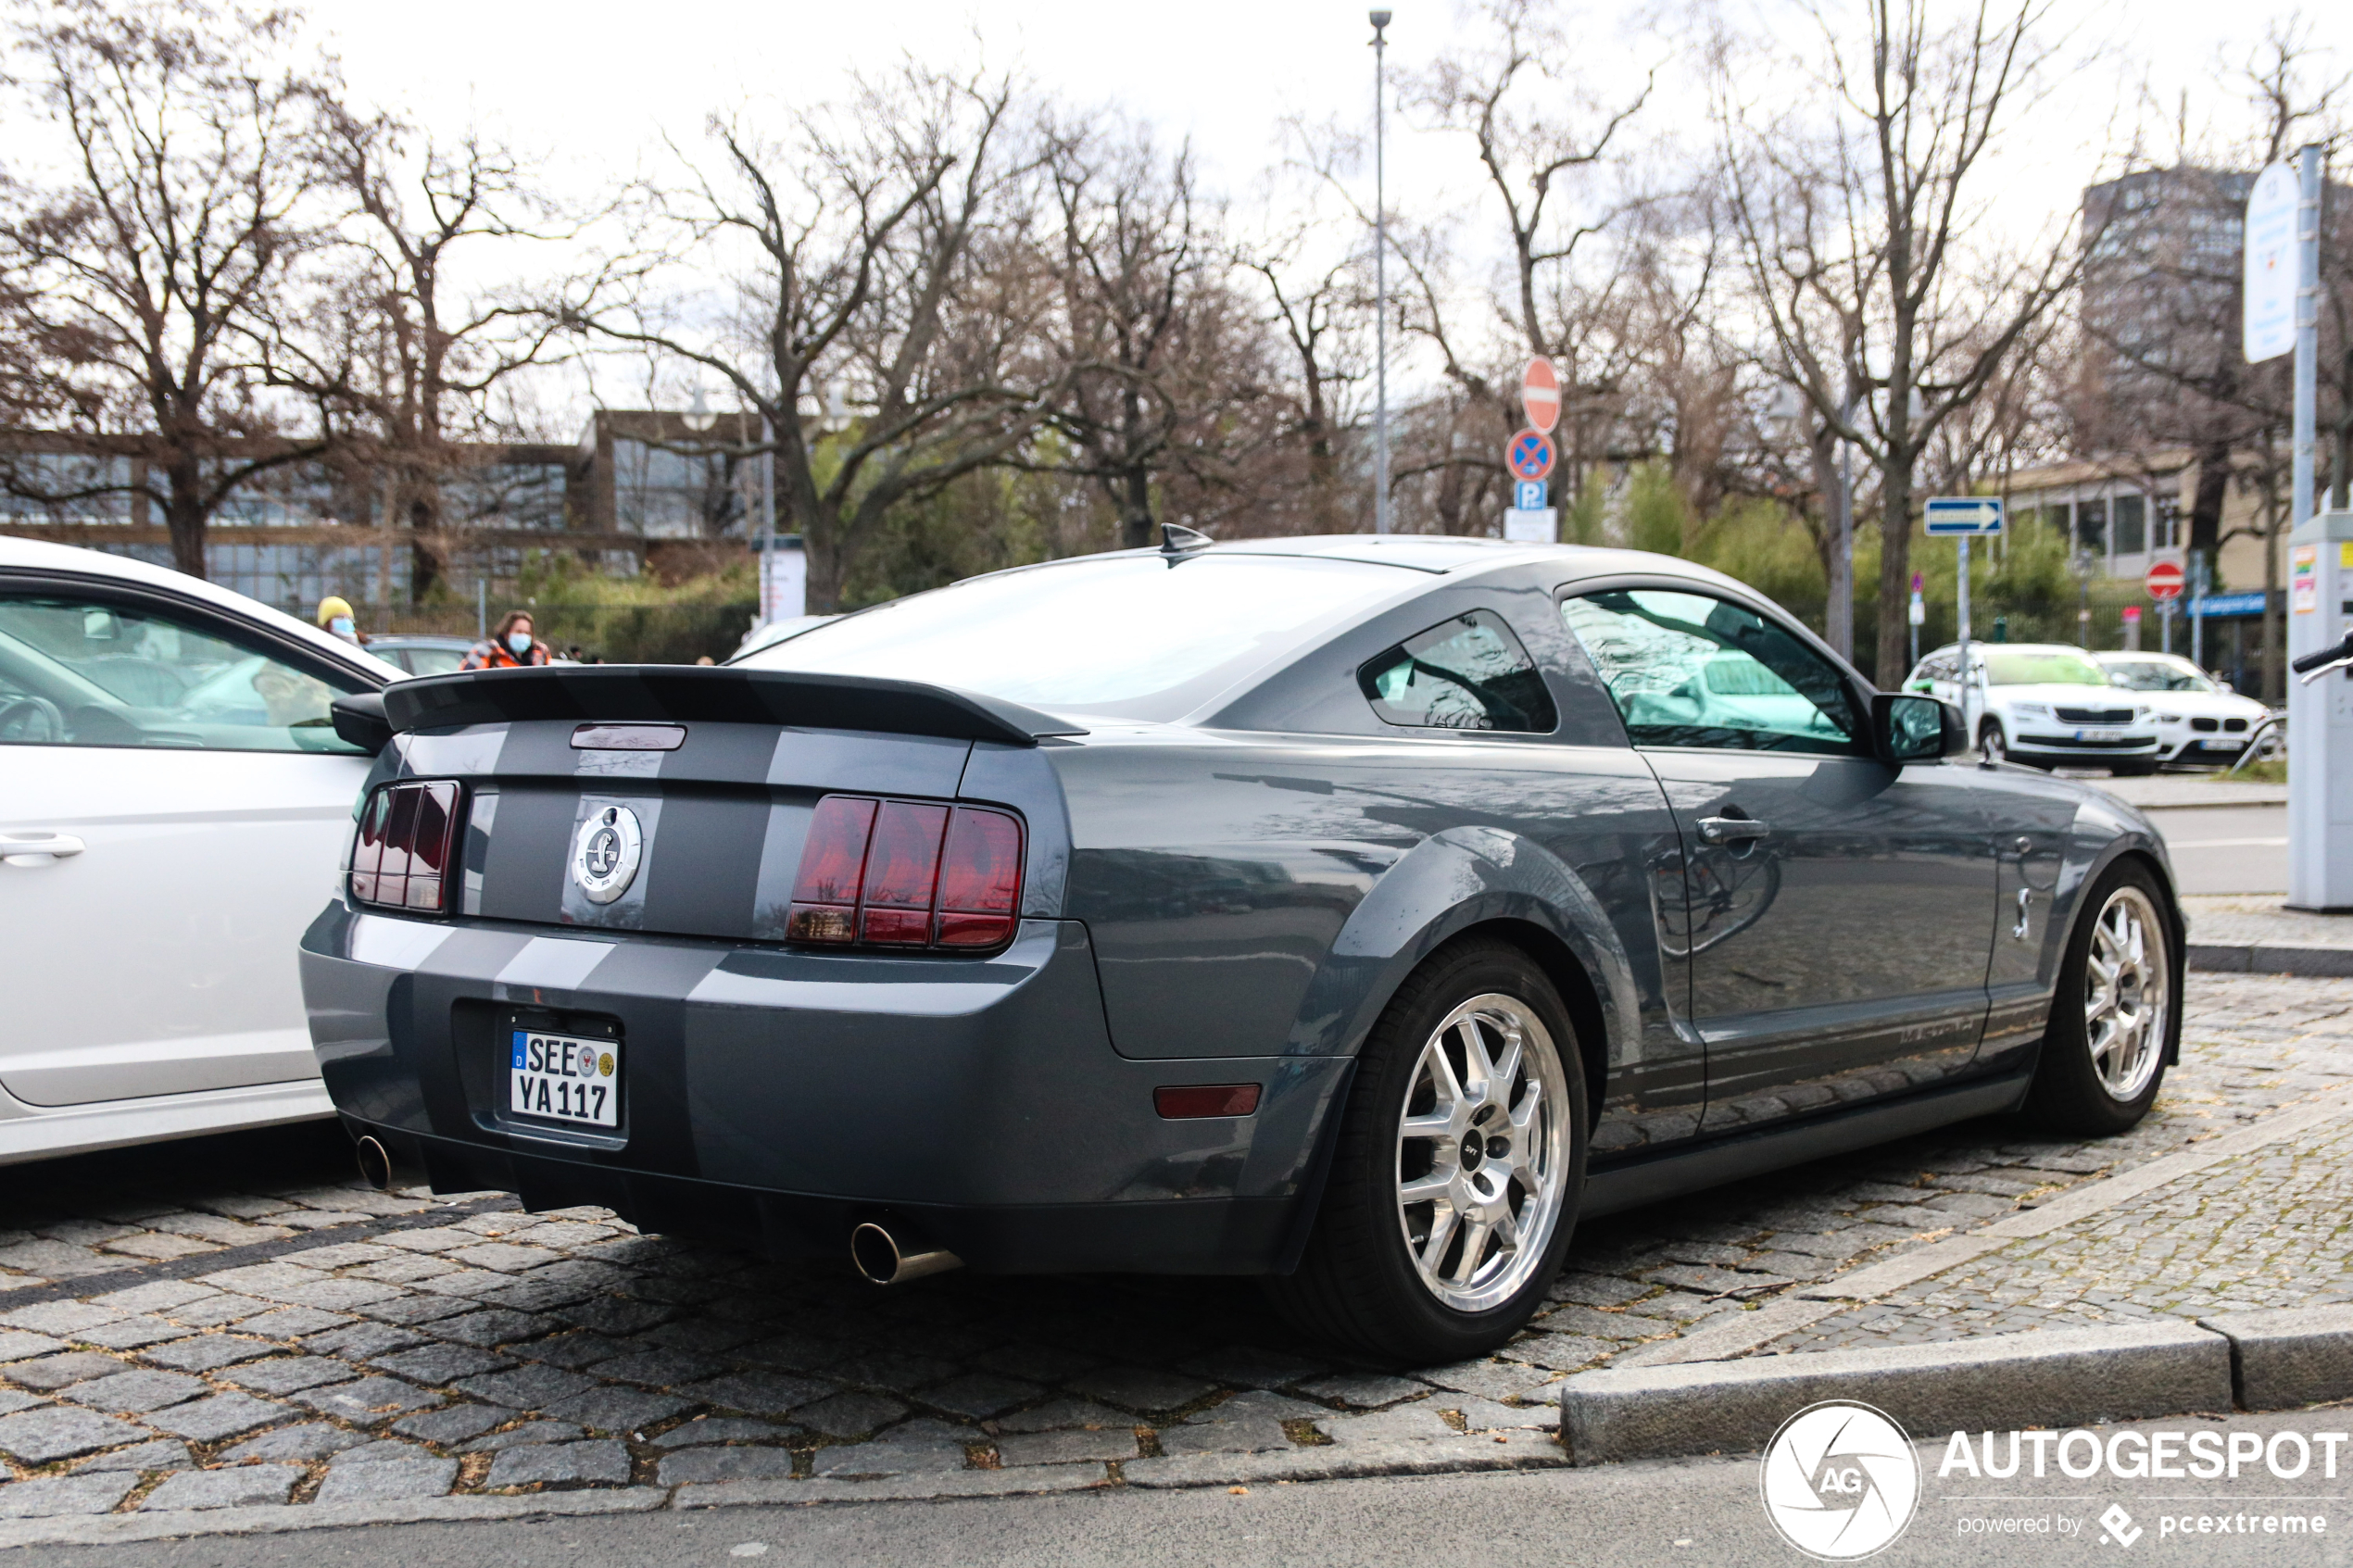 Ford Mustang Shelby GT500 Neuf ballainvilliers (Essonne) - n°4697496 -  PASSION AUTOMOBILES PARIS